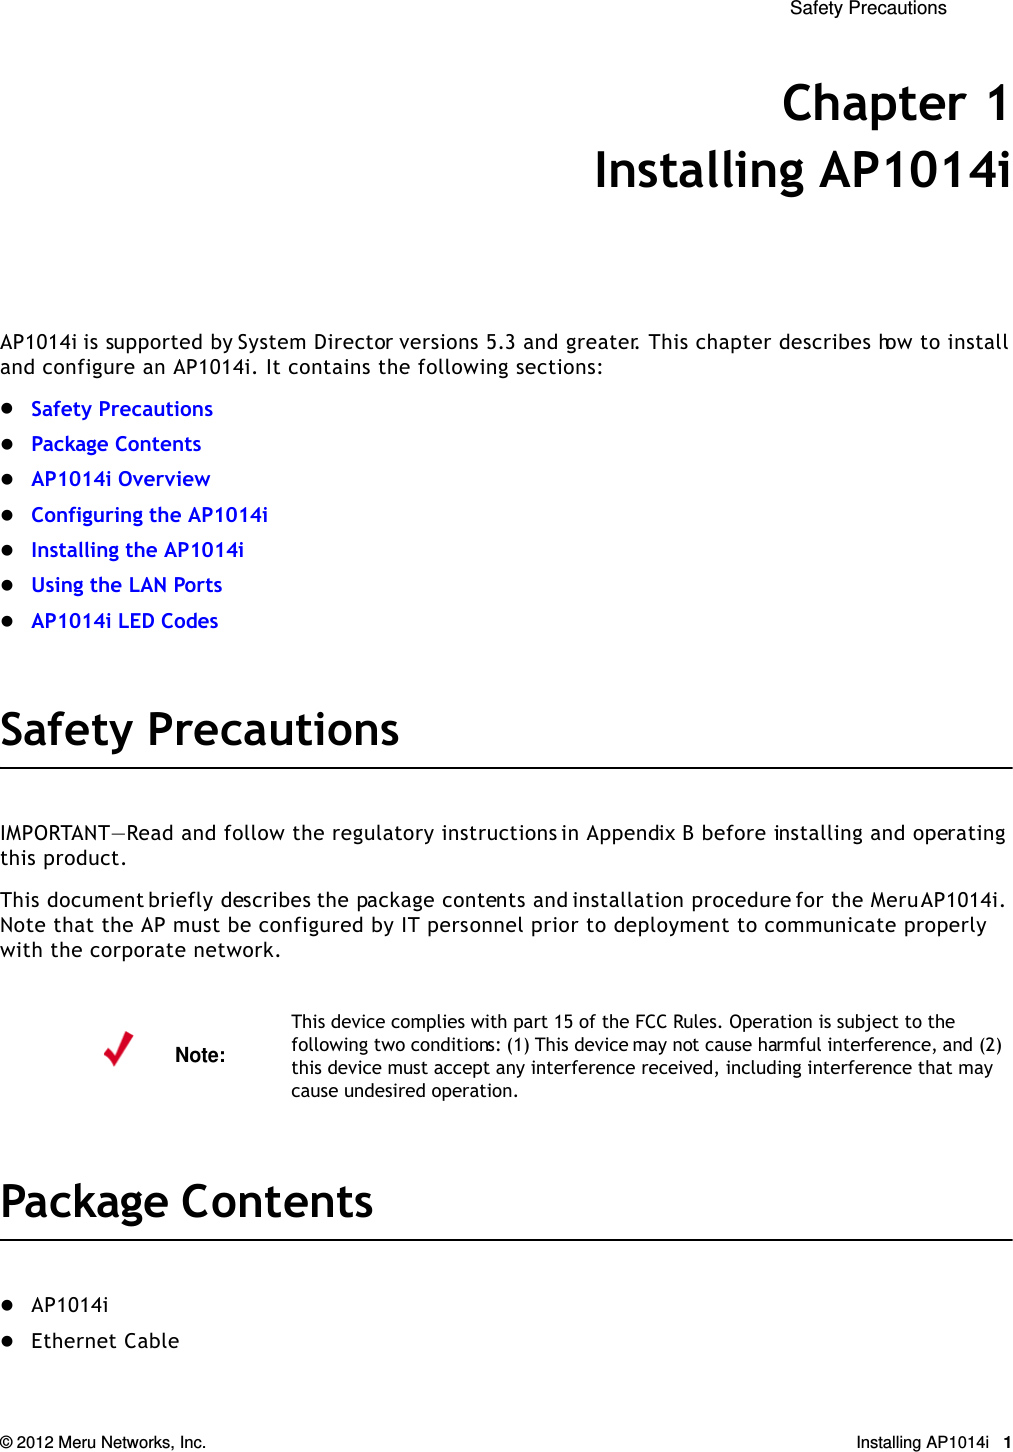  Safety Precautions © 2012 Meru Networks, Inc. Installing AP1014i 1Chapter 1Installing AP1014iAP1014i is supported by System Director versions 5.3 and greater. This chapter describes how to install and configure an AP1014i. It contains the following sections:Safety PrecautionsPackage ContentsAP1014i OverviewConfiguring the AP1014iInstalling the AP1014iUsing the LAN PortsAP1014i LED CodesSafety PrecautionsIMPORTANT—Read and follow the regulatory instructions in Appendix B before installing and operating this product.This document briefly describes the package contents and installation procedure for the Meru AP1014i. Note that the AP must be configured by IT personnel prior to deployment to communicate properly with the corporate network.Package ContentsAP1014iEthernet CableNote:This device complies with part 15 of the FCC Rules. Operation is subject to the following two conditions: (1) This device may not cause harmful interference, and (2) this device must accept any interference received, including interference that may cause undesired operation.